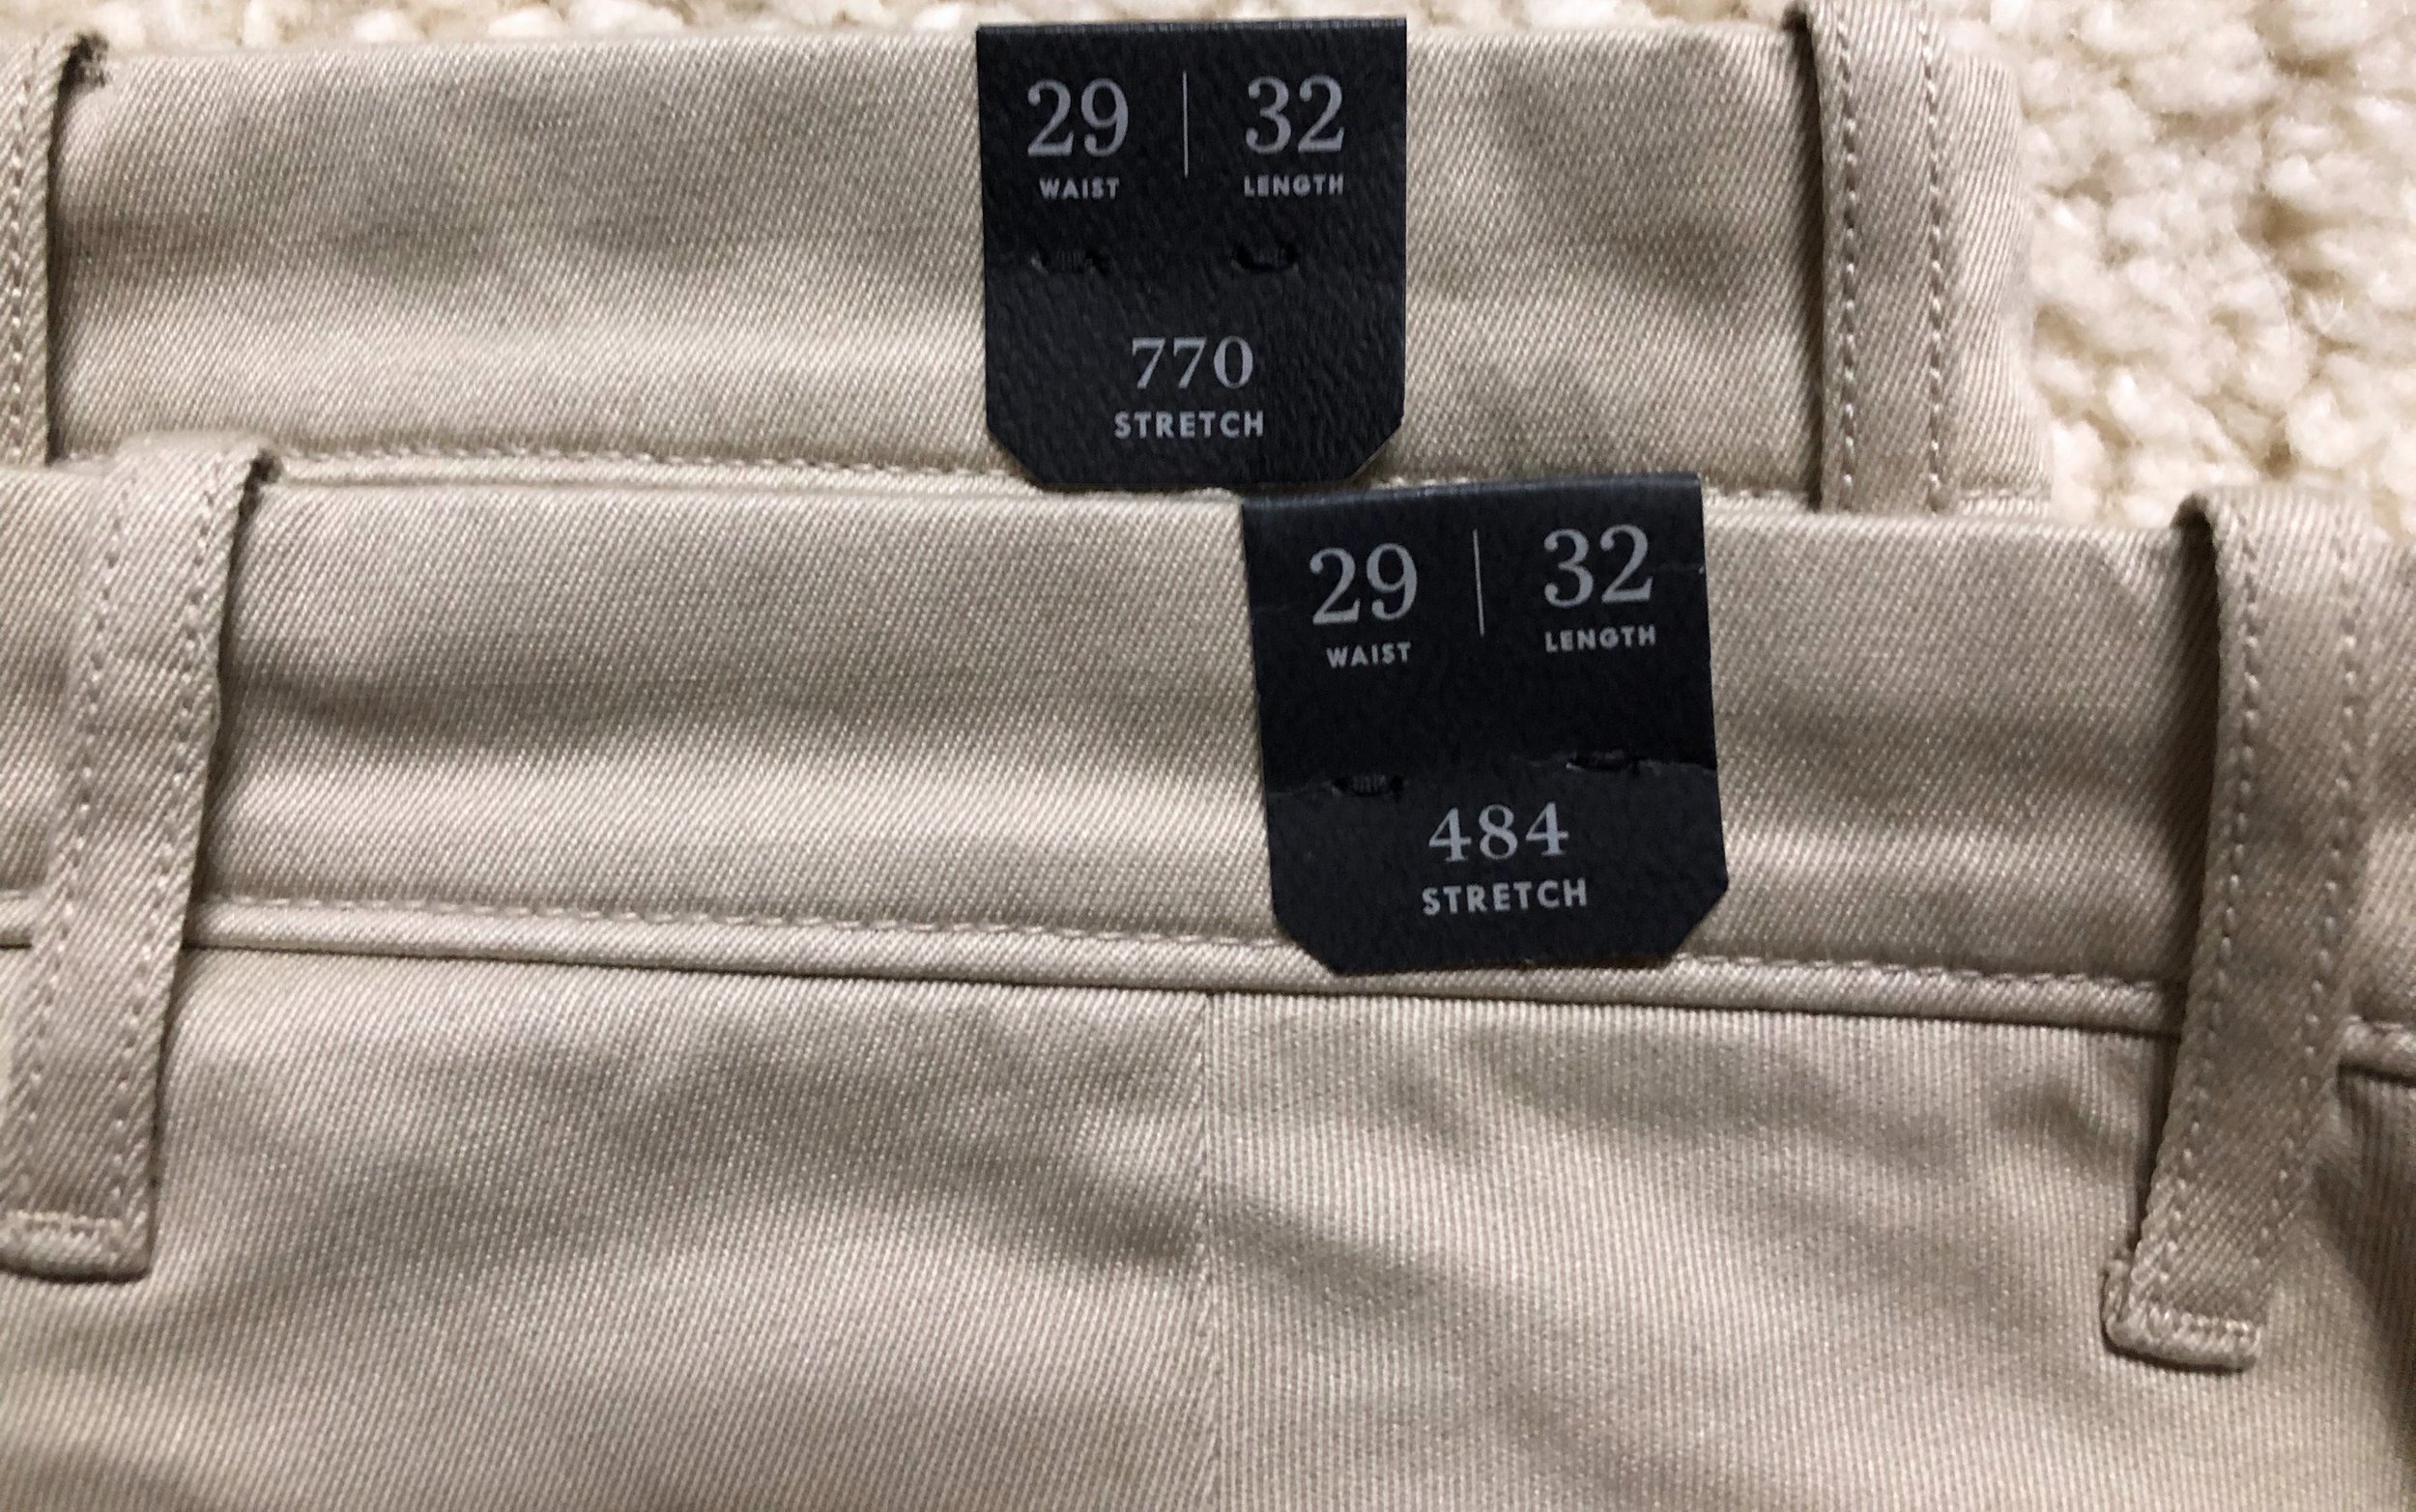 J Crew 770 Straight-fit pant in stretch chino $68 assorted sizes 